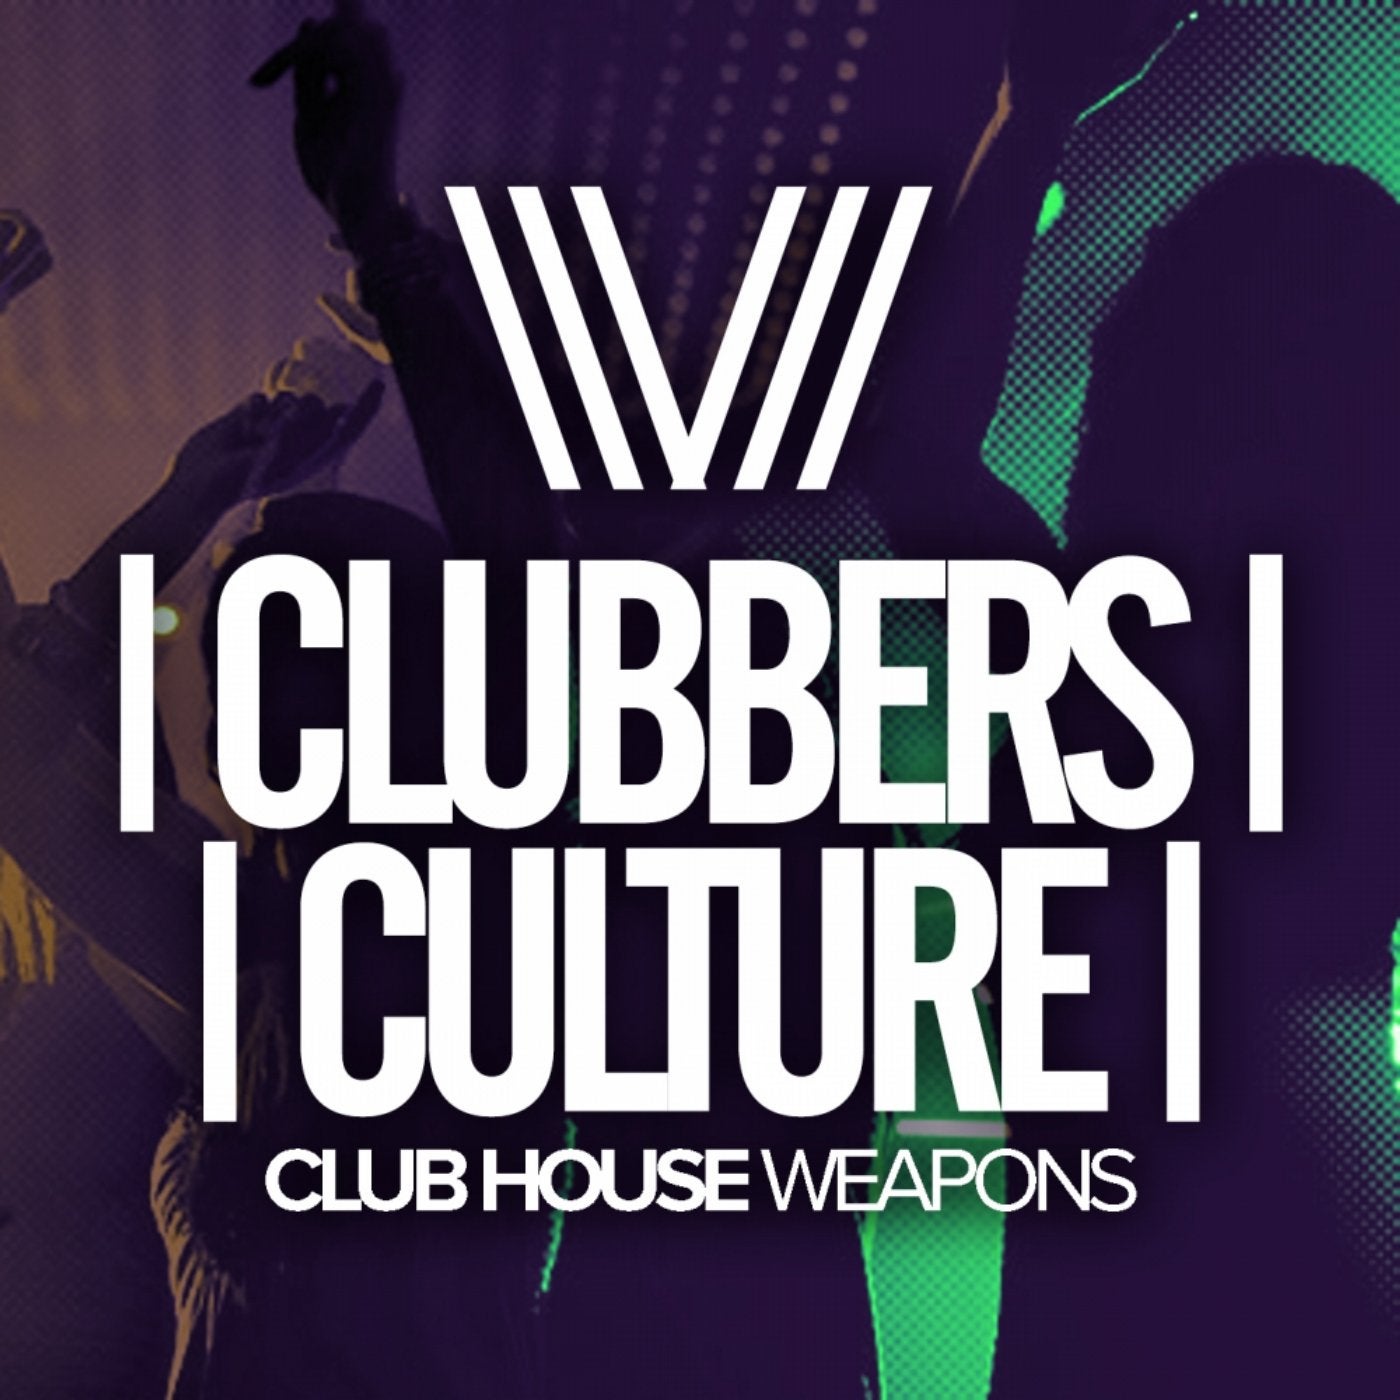 Clubbers Culture: Club House Weapons